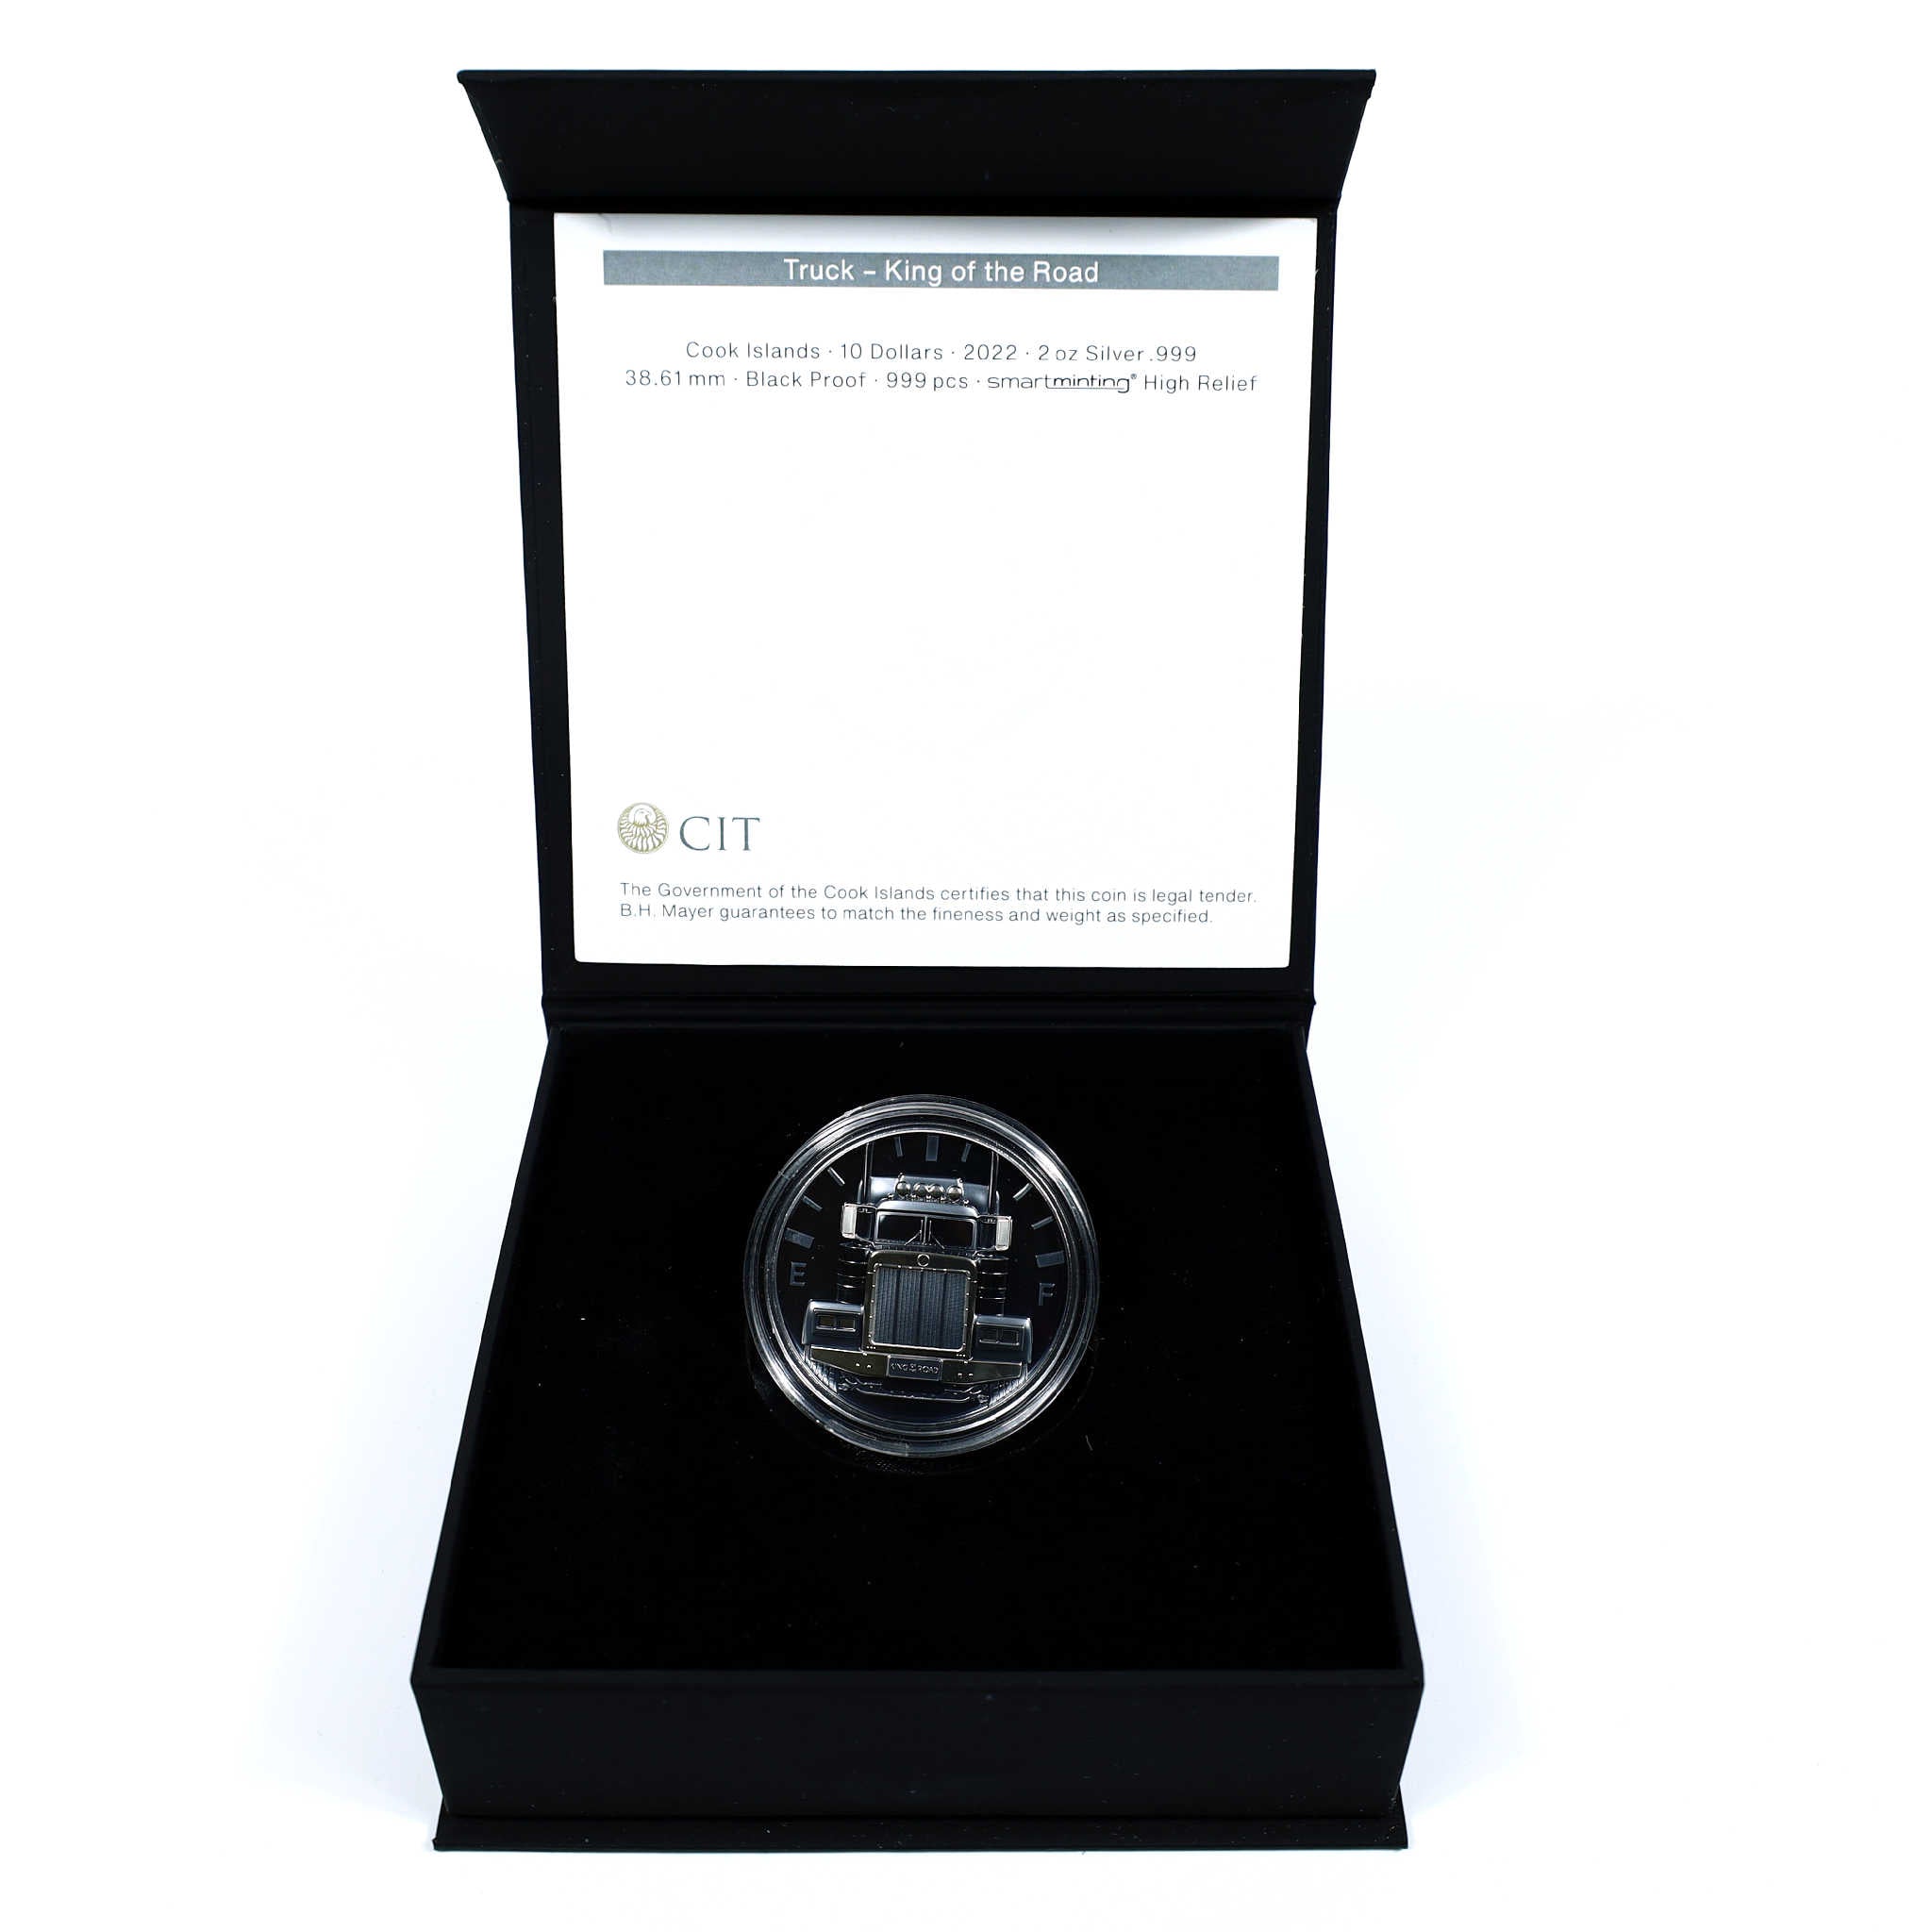 Truck King of the Road 2 oz Silver $10 Proof 2022 COA SKU:CPC6136